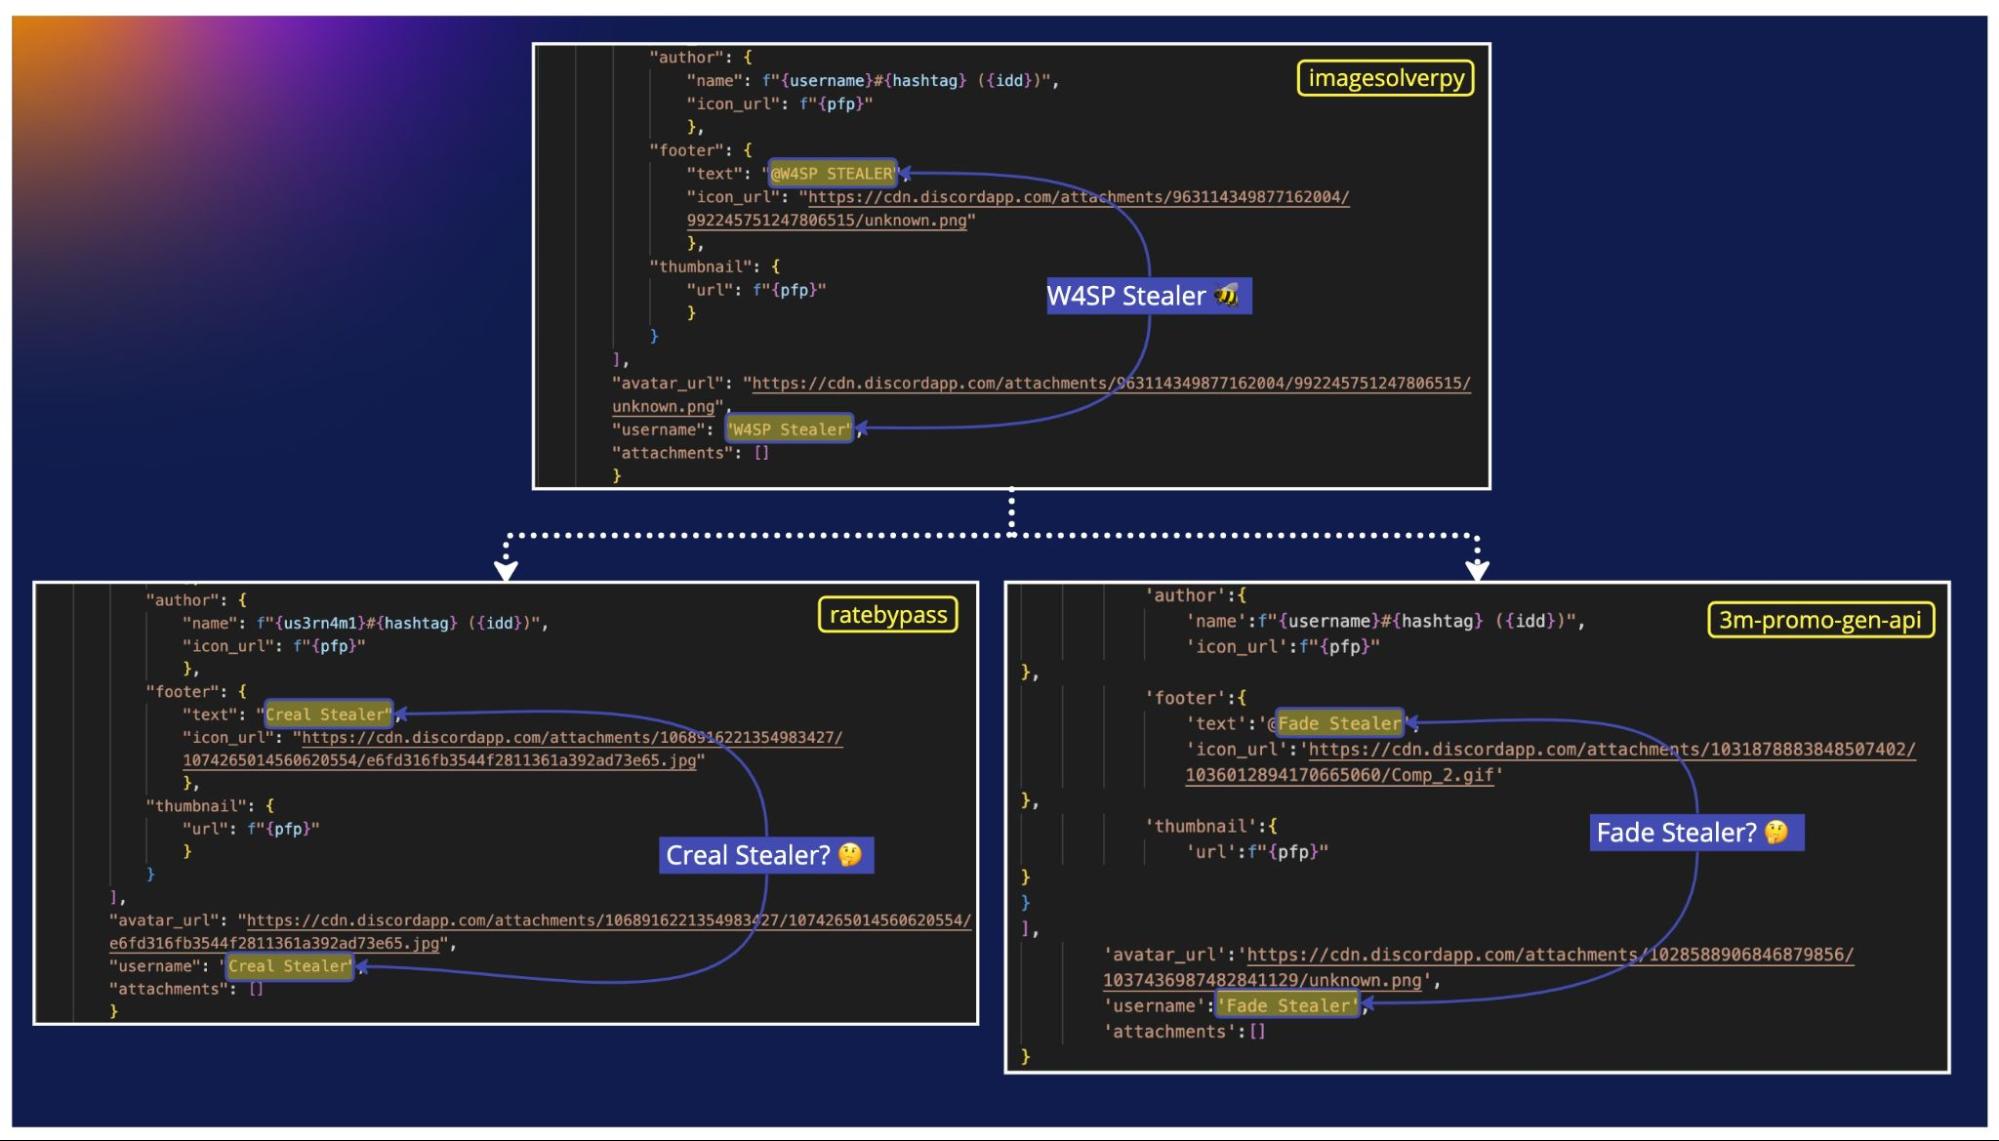 This image features three screenshots of code. They are labeled W4SP Stealer, Creal Stealer, and Fade Stealer.